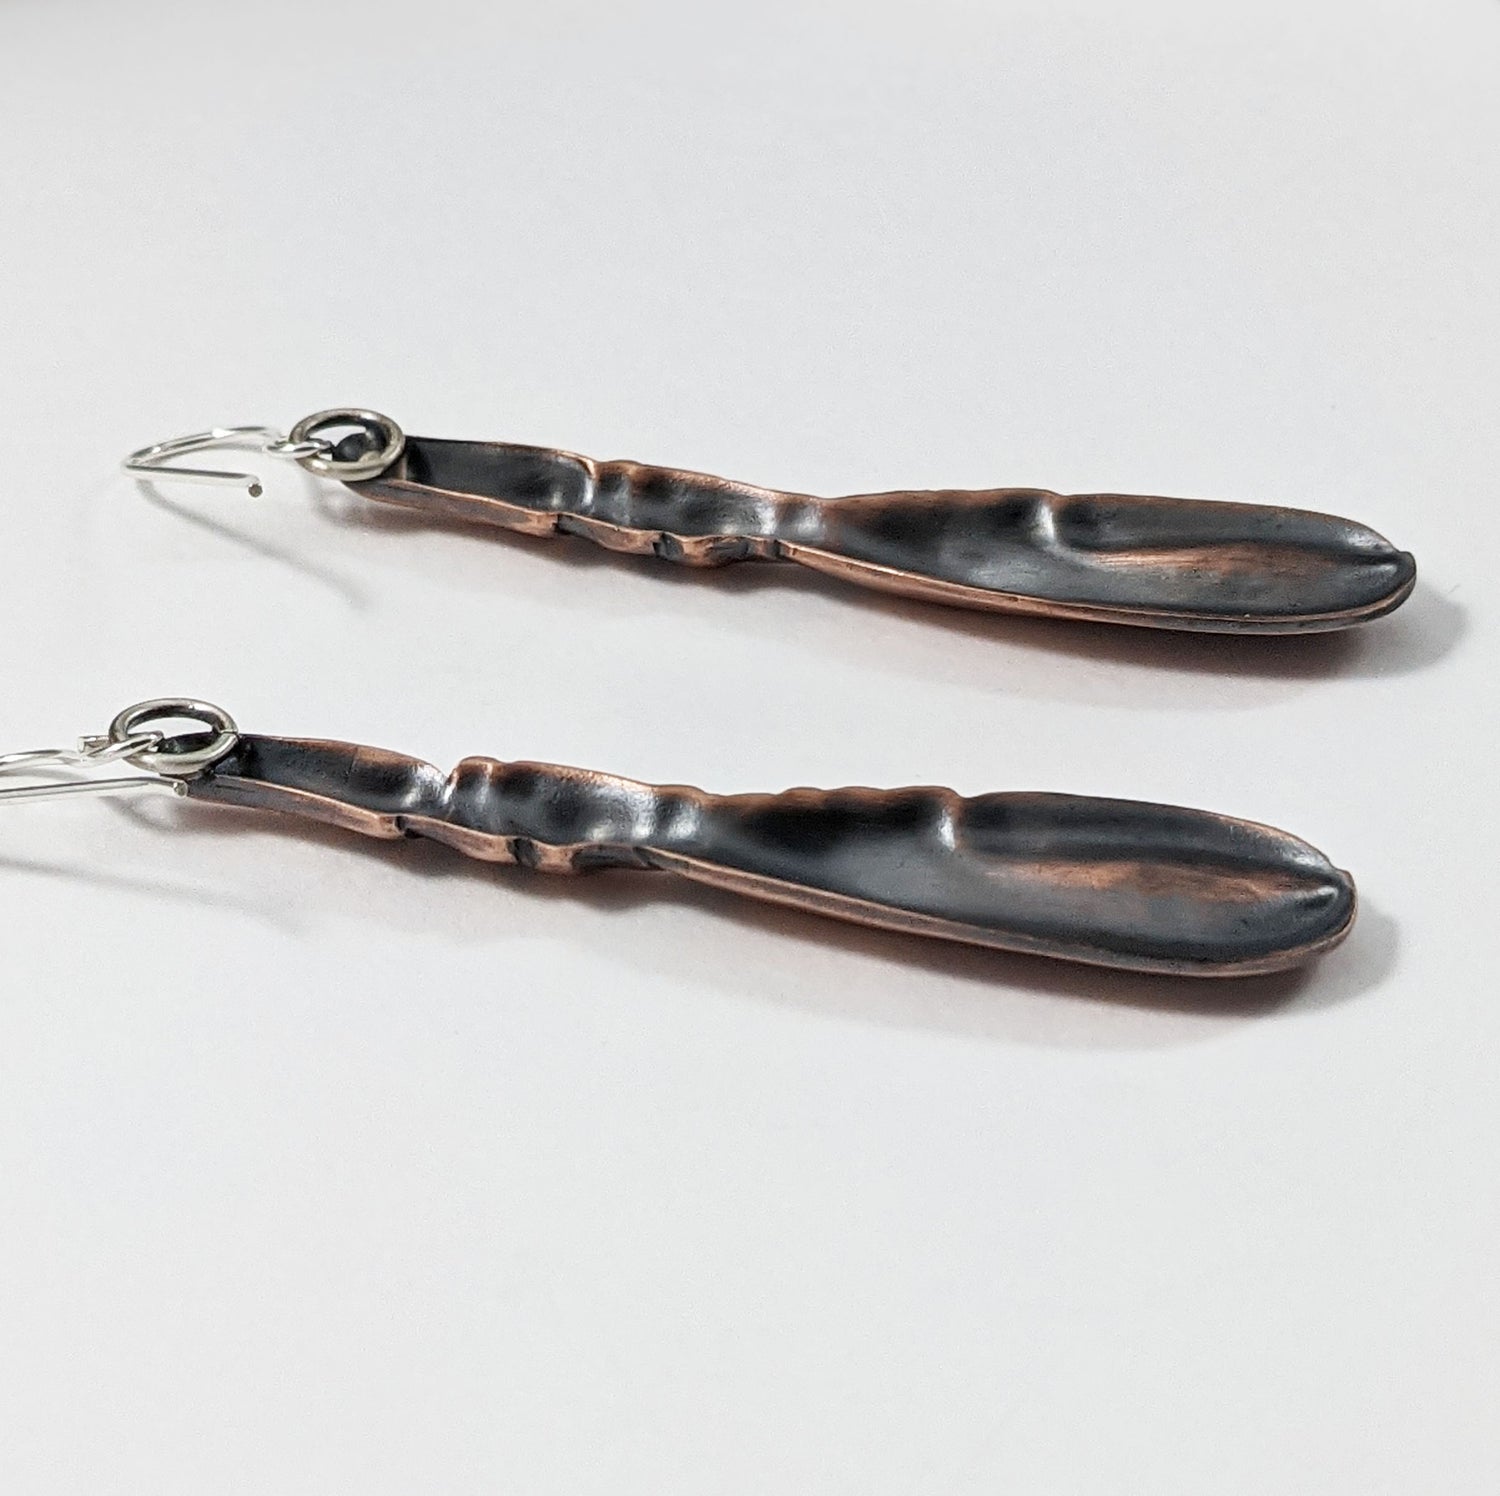 Copper earrings in the shape of a lobster claw. The claws are three dimensional and are on sterling silver ear wires. View of the back of the earrings showing that they are lightweight because they are hollow in the back.